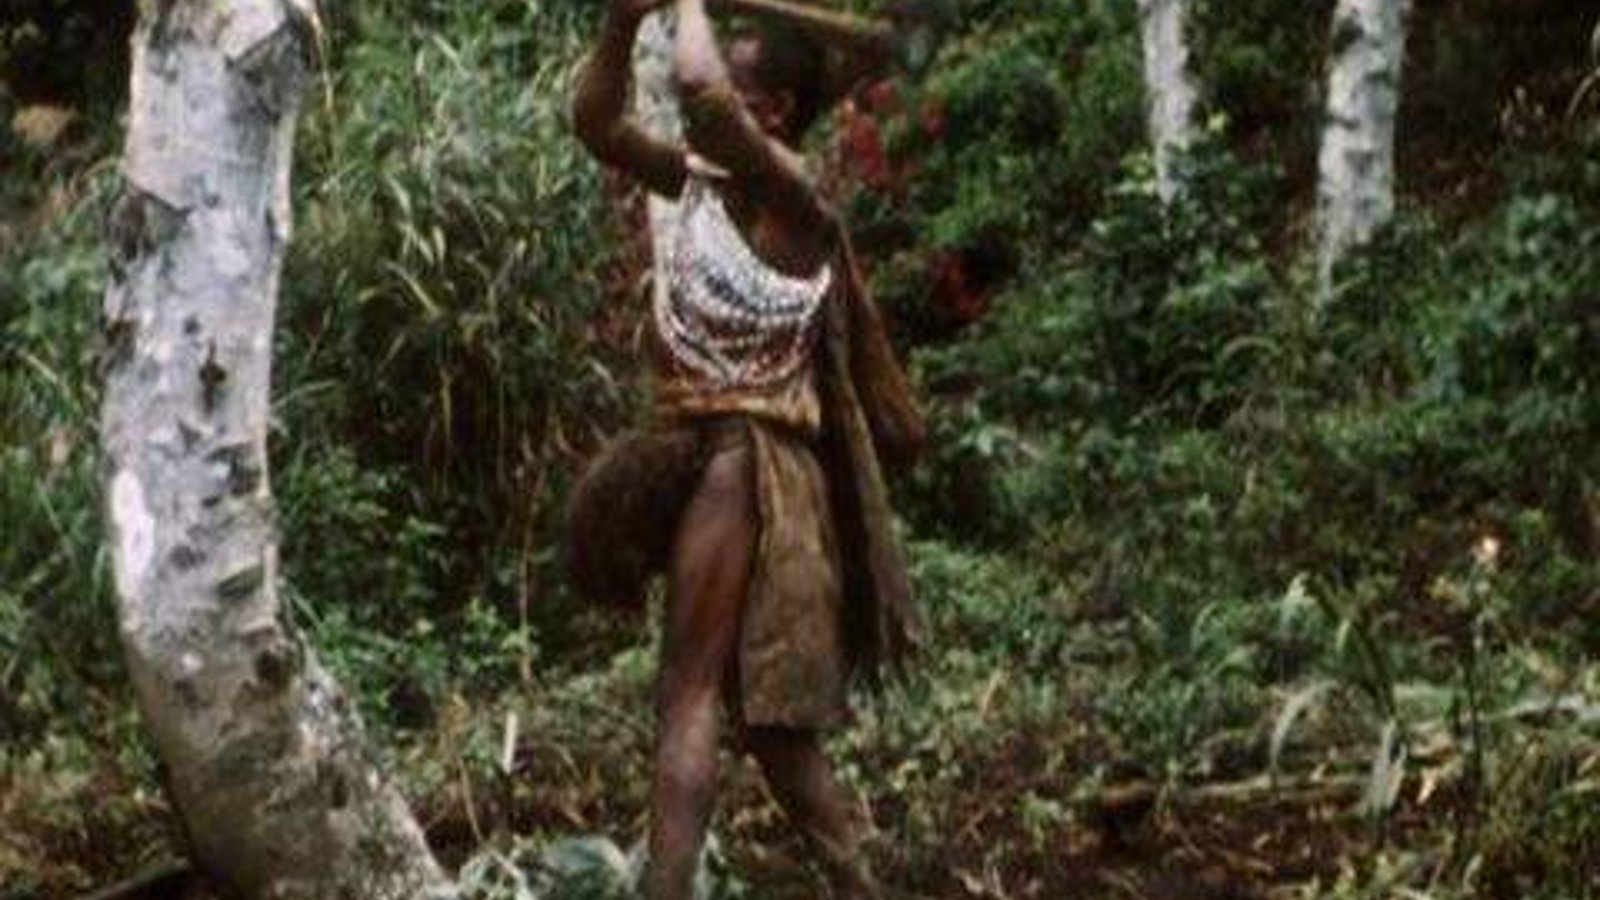 To Find the Baruya Story - An Anthropologist at Work with a New Guinea Tribe